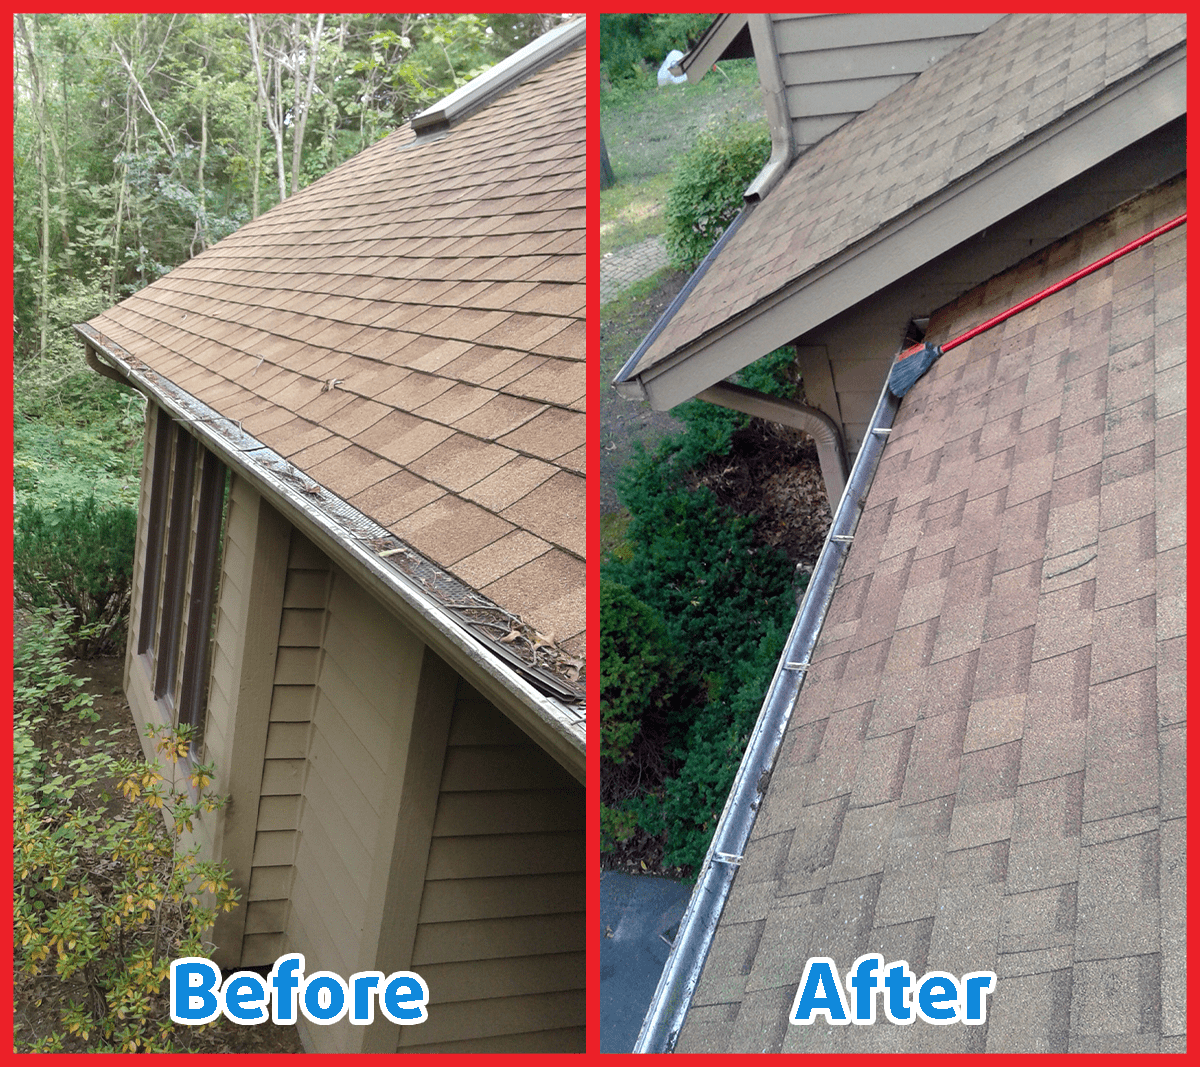 before and after images of gutter cleaning